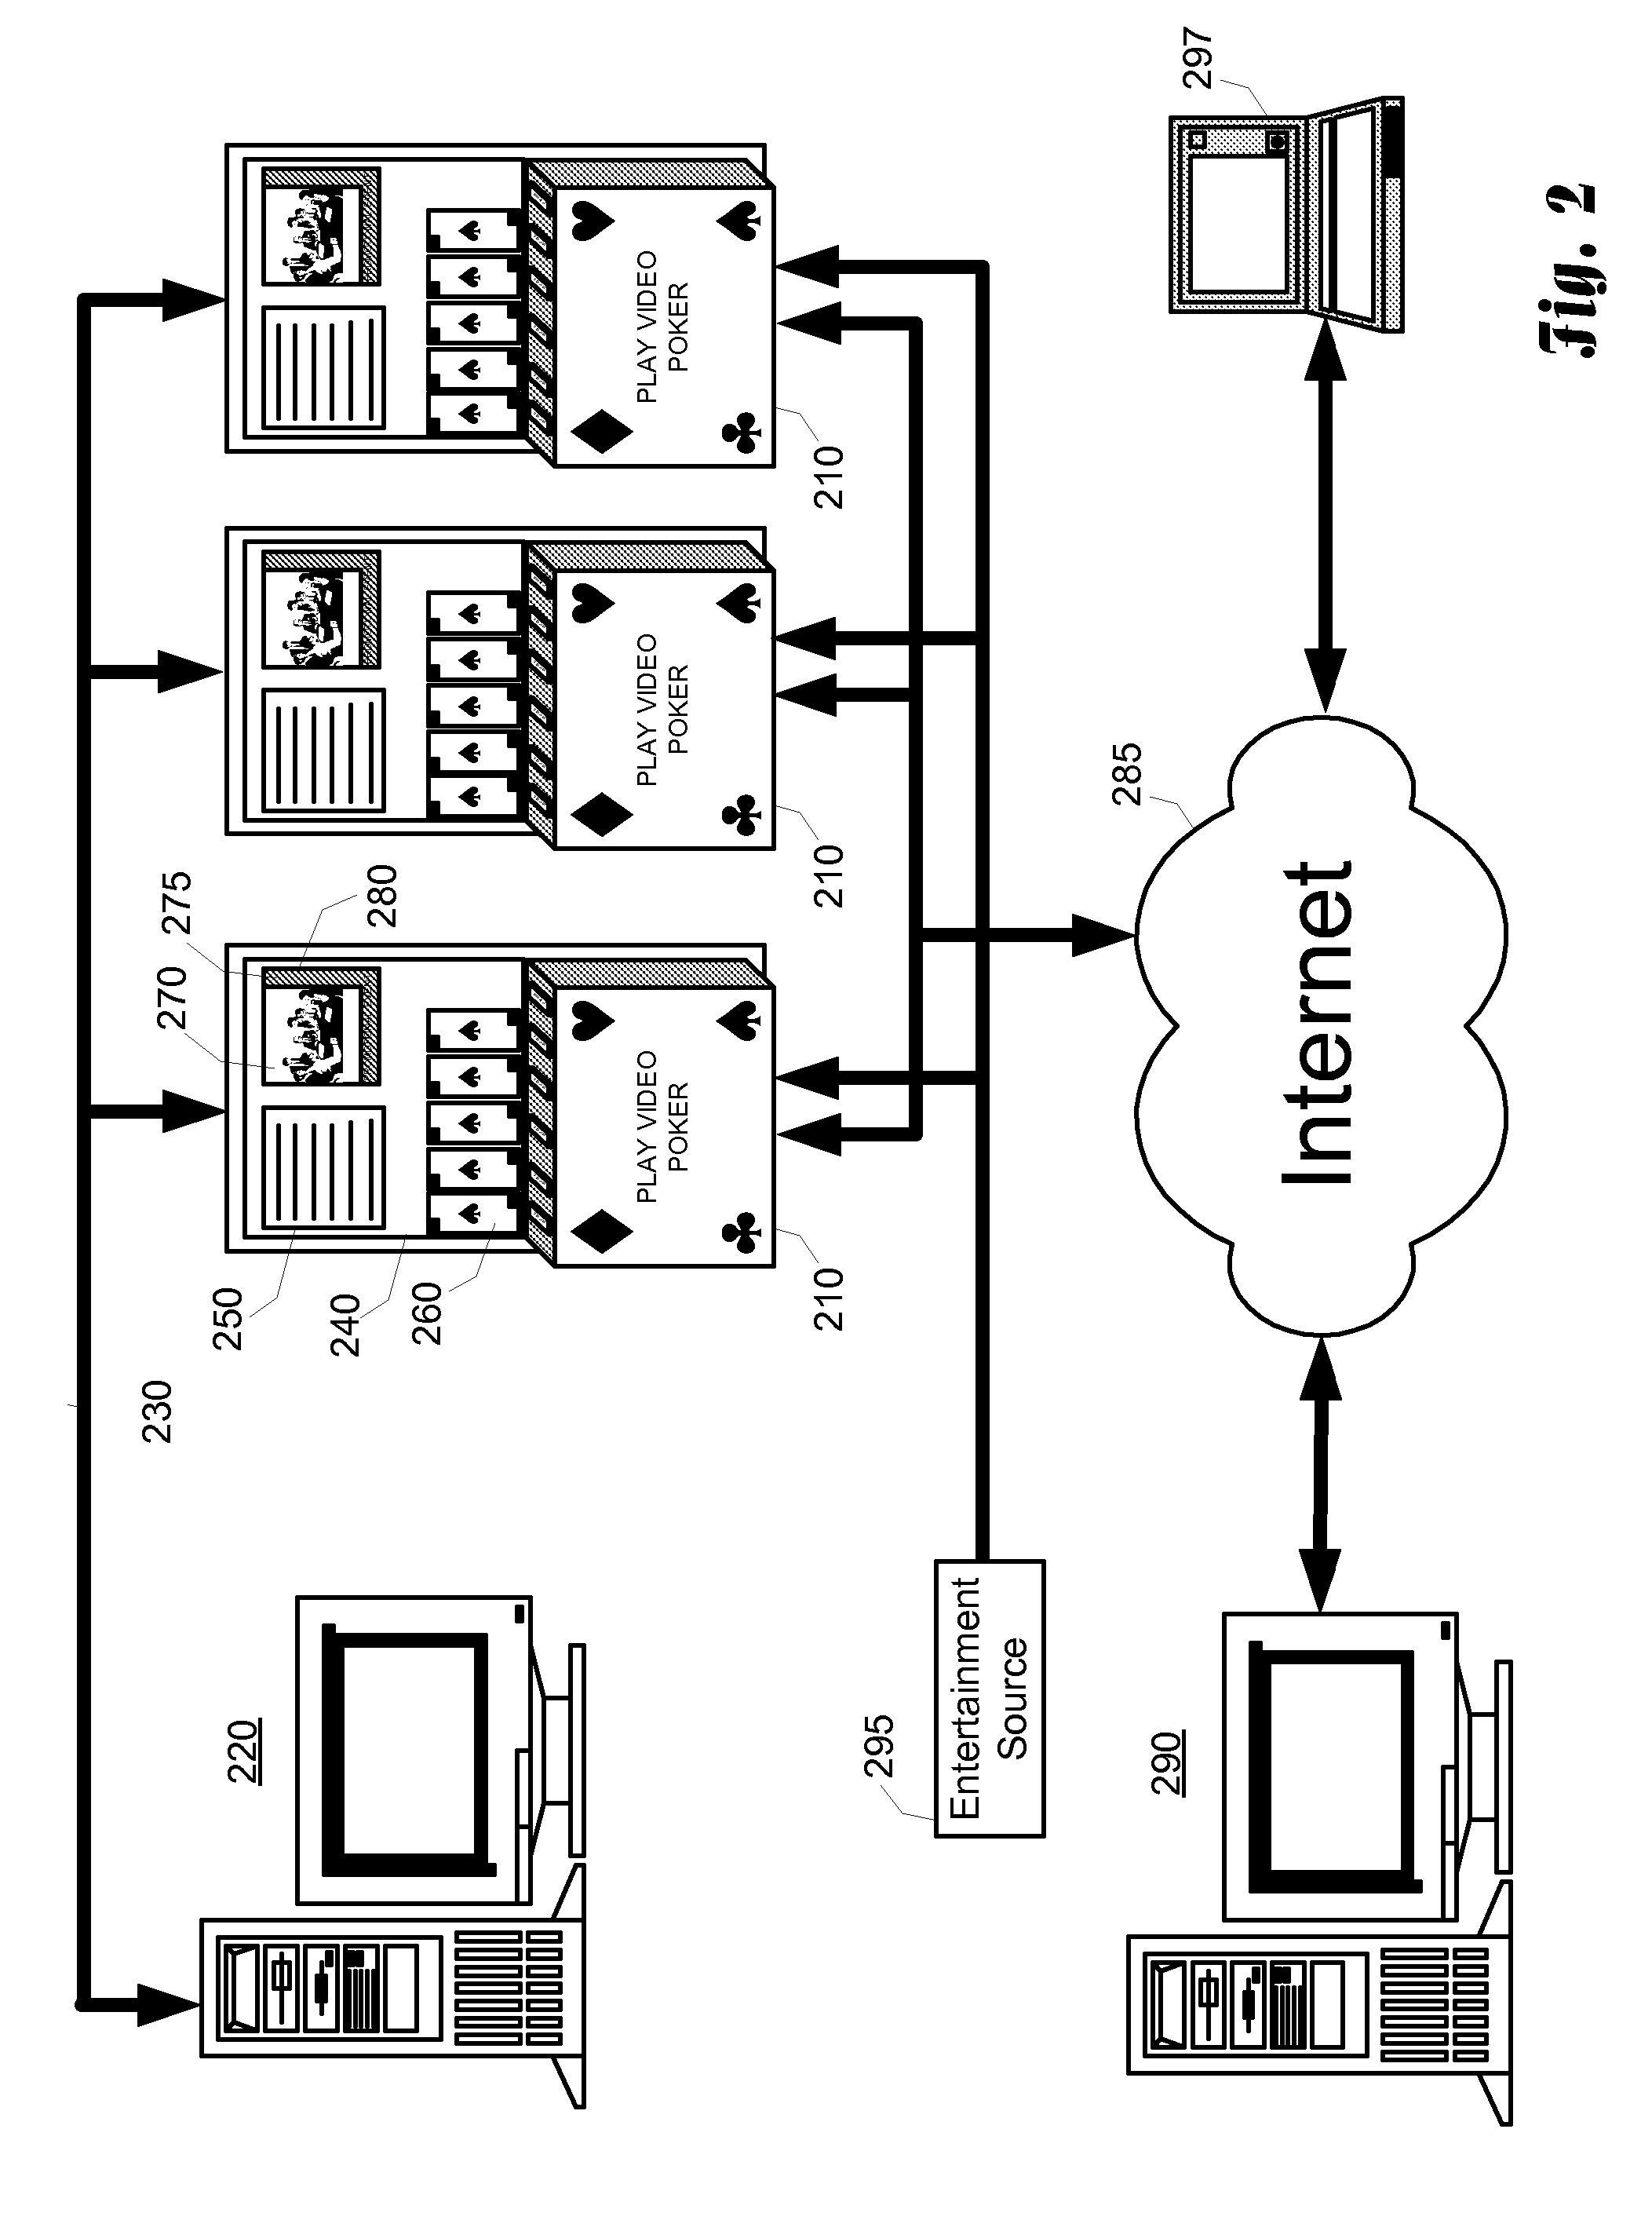 Closed-loop system for providing additional event participation to electronic video game customers